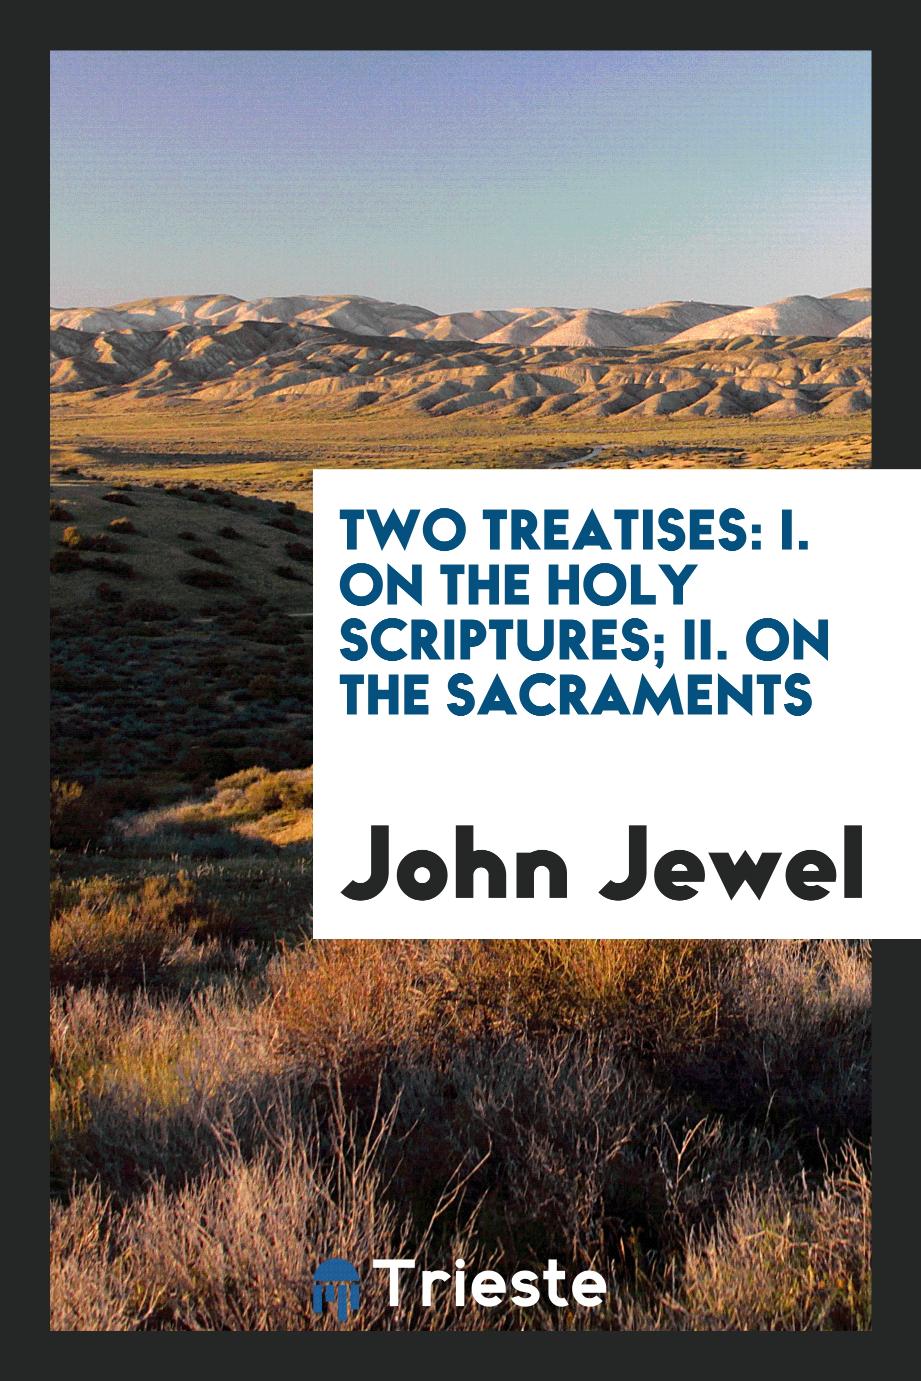 Two treatises: I. On the Holy Scriptures; II. On the sacraments